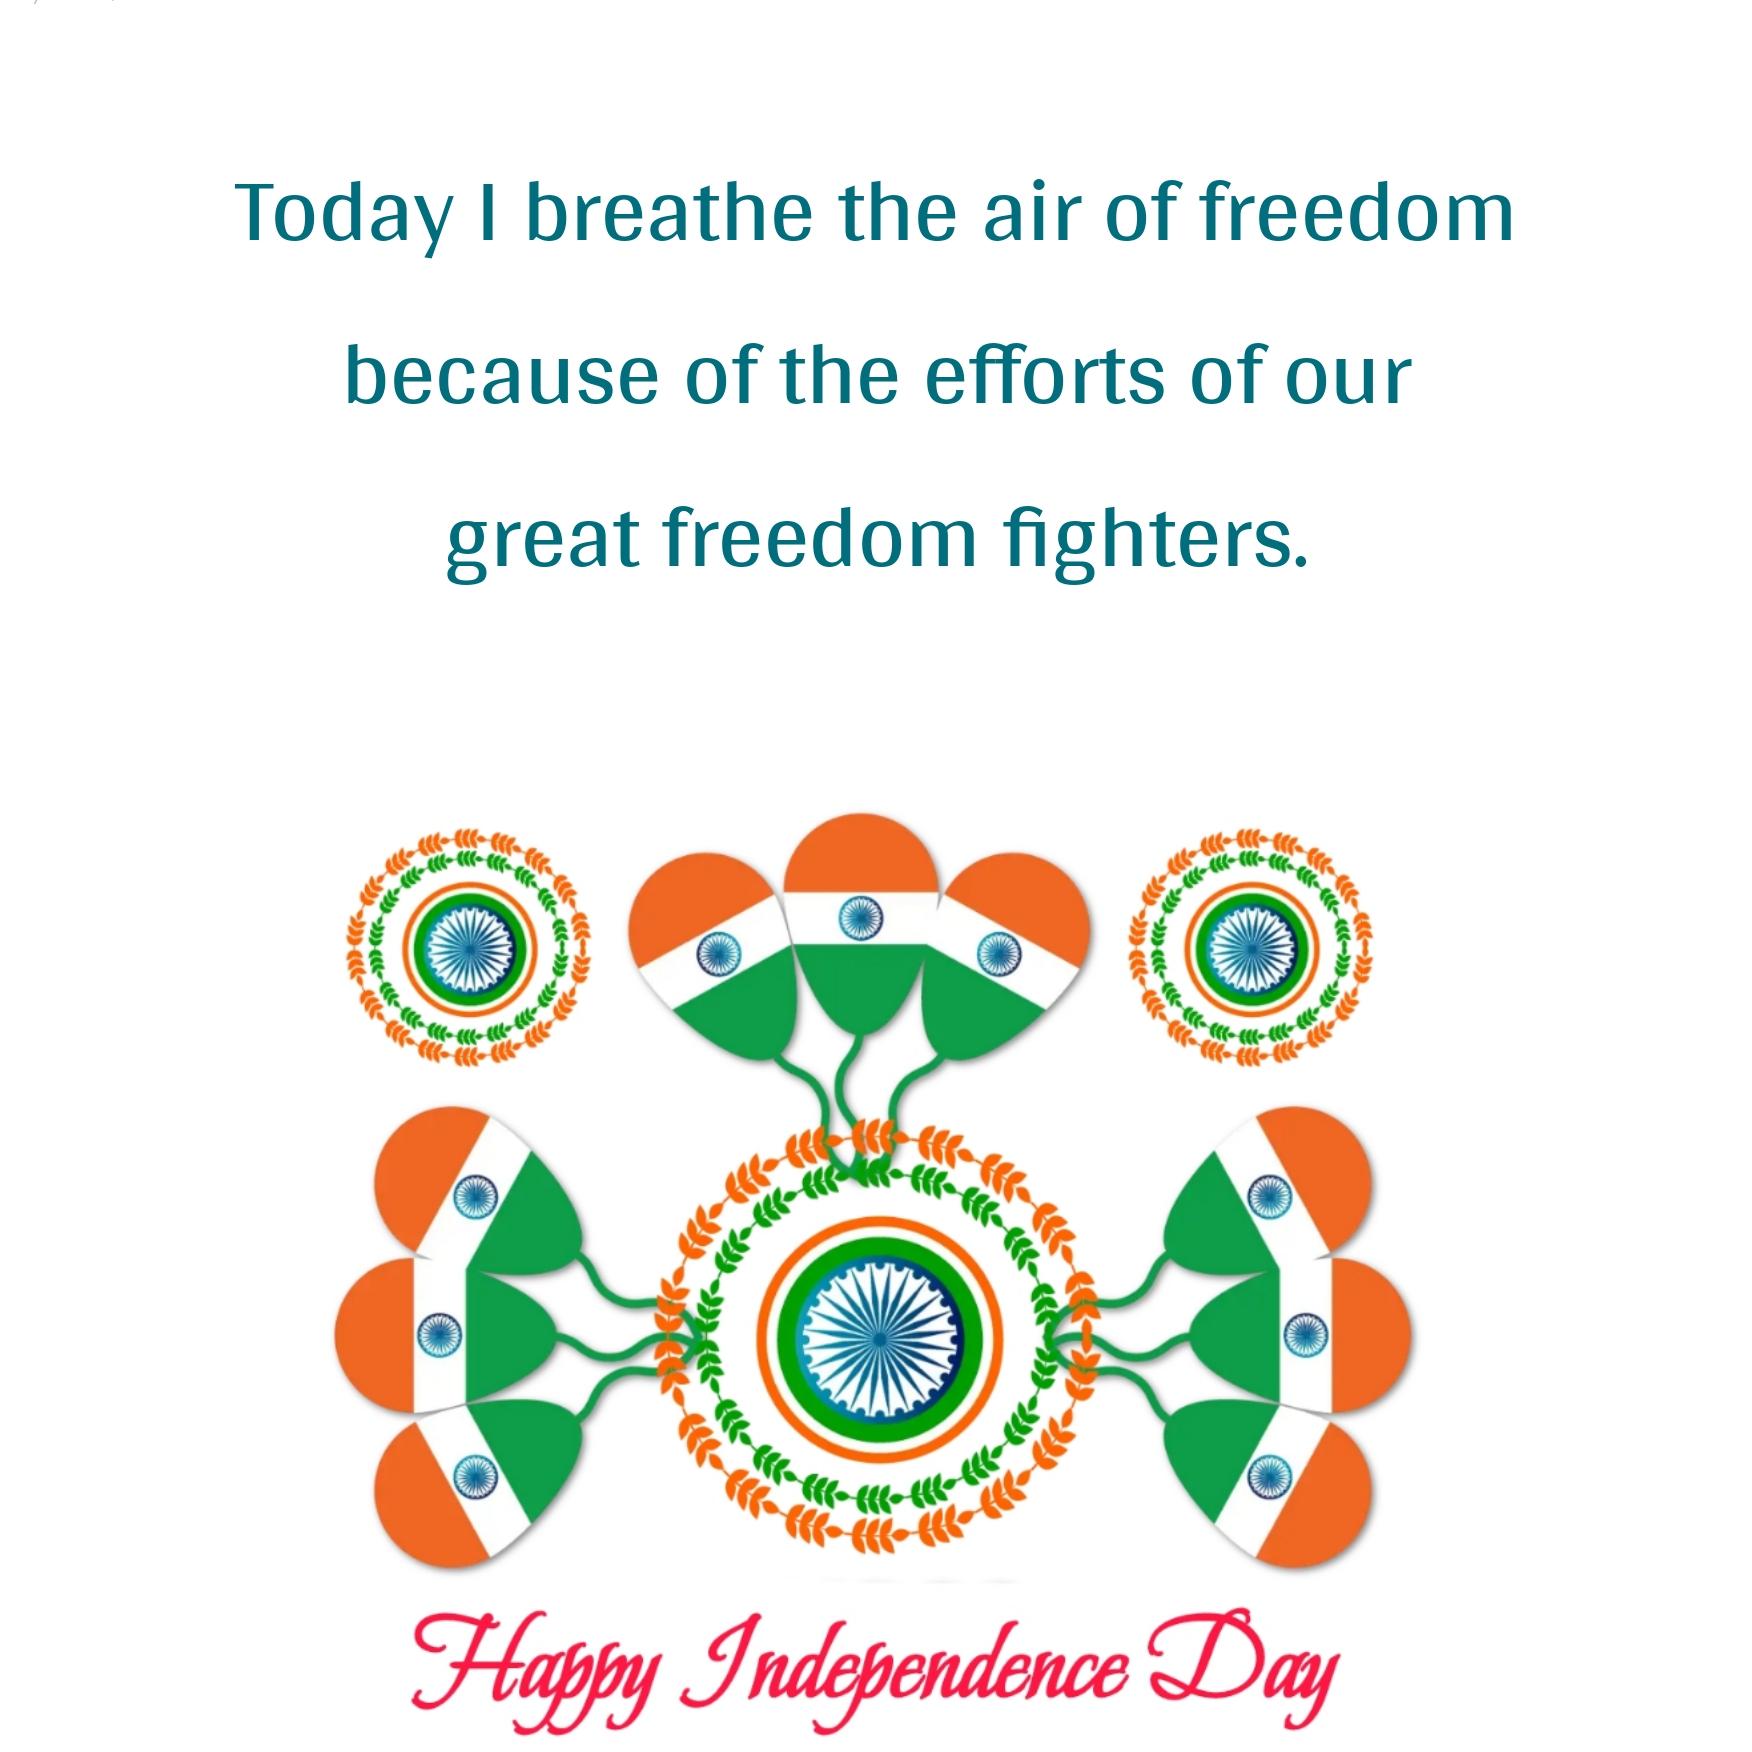 Today I breathe the air of freedom because of the efforts